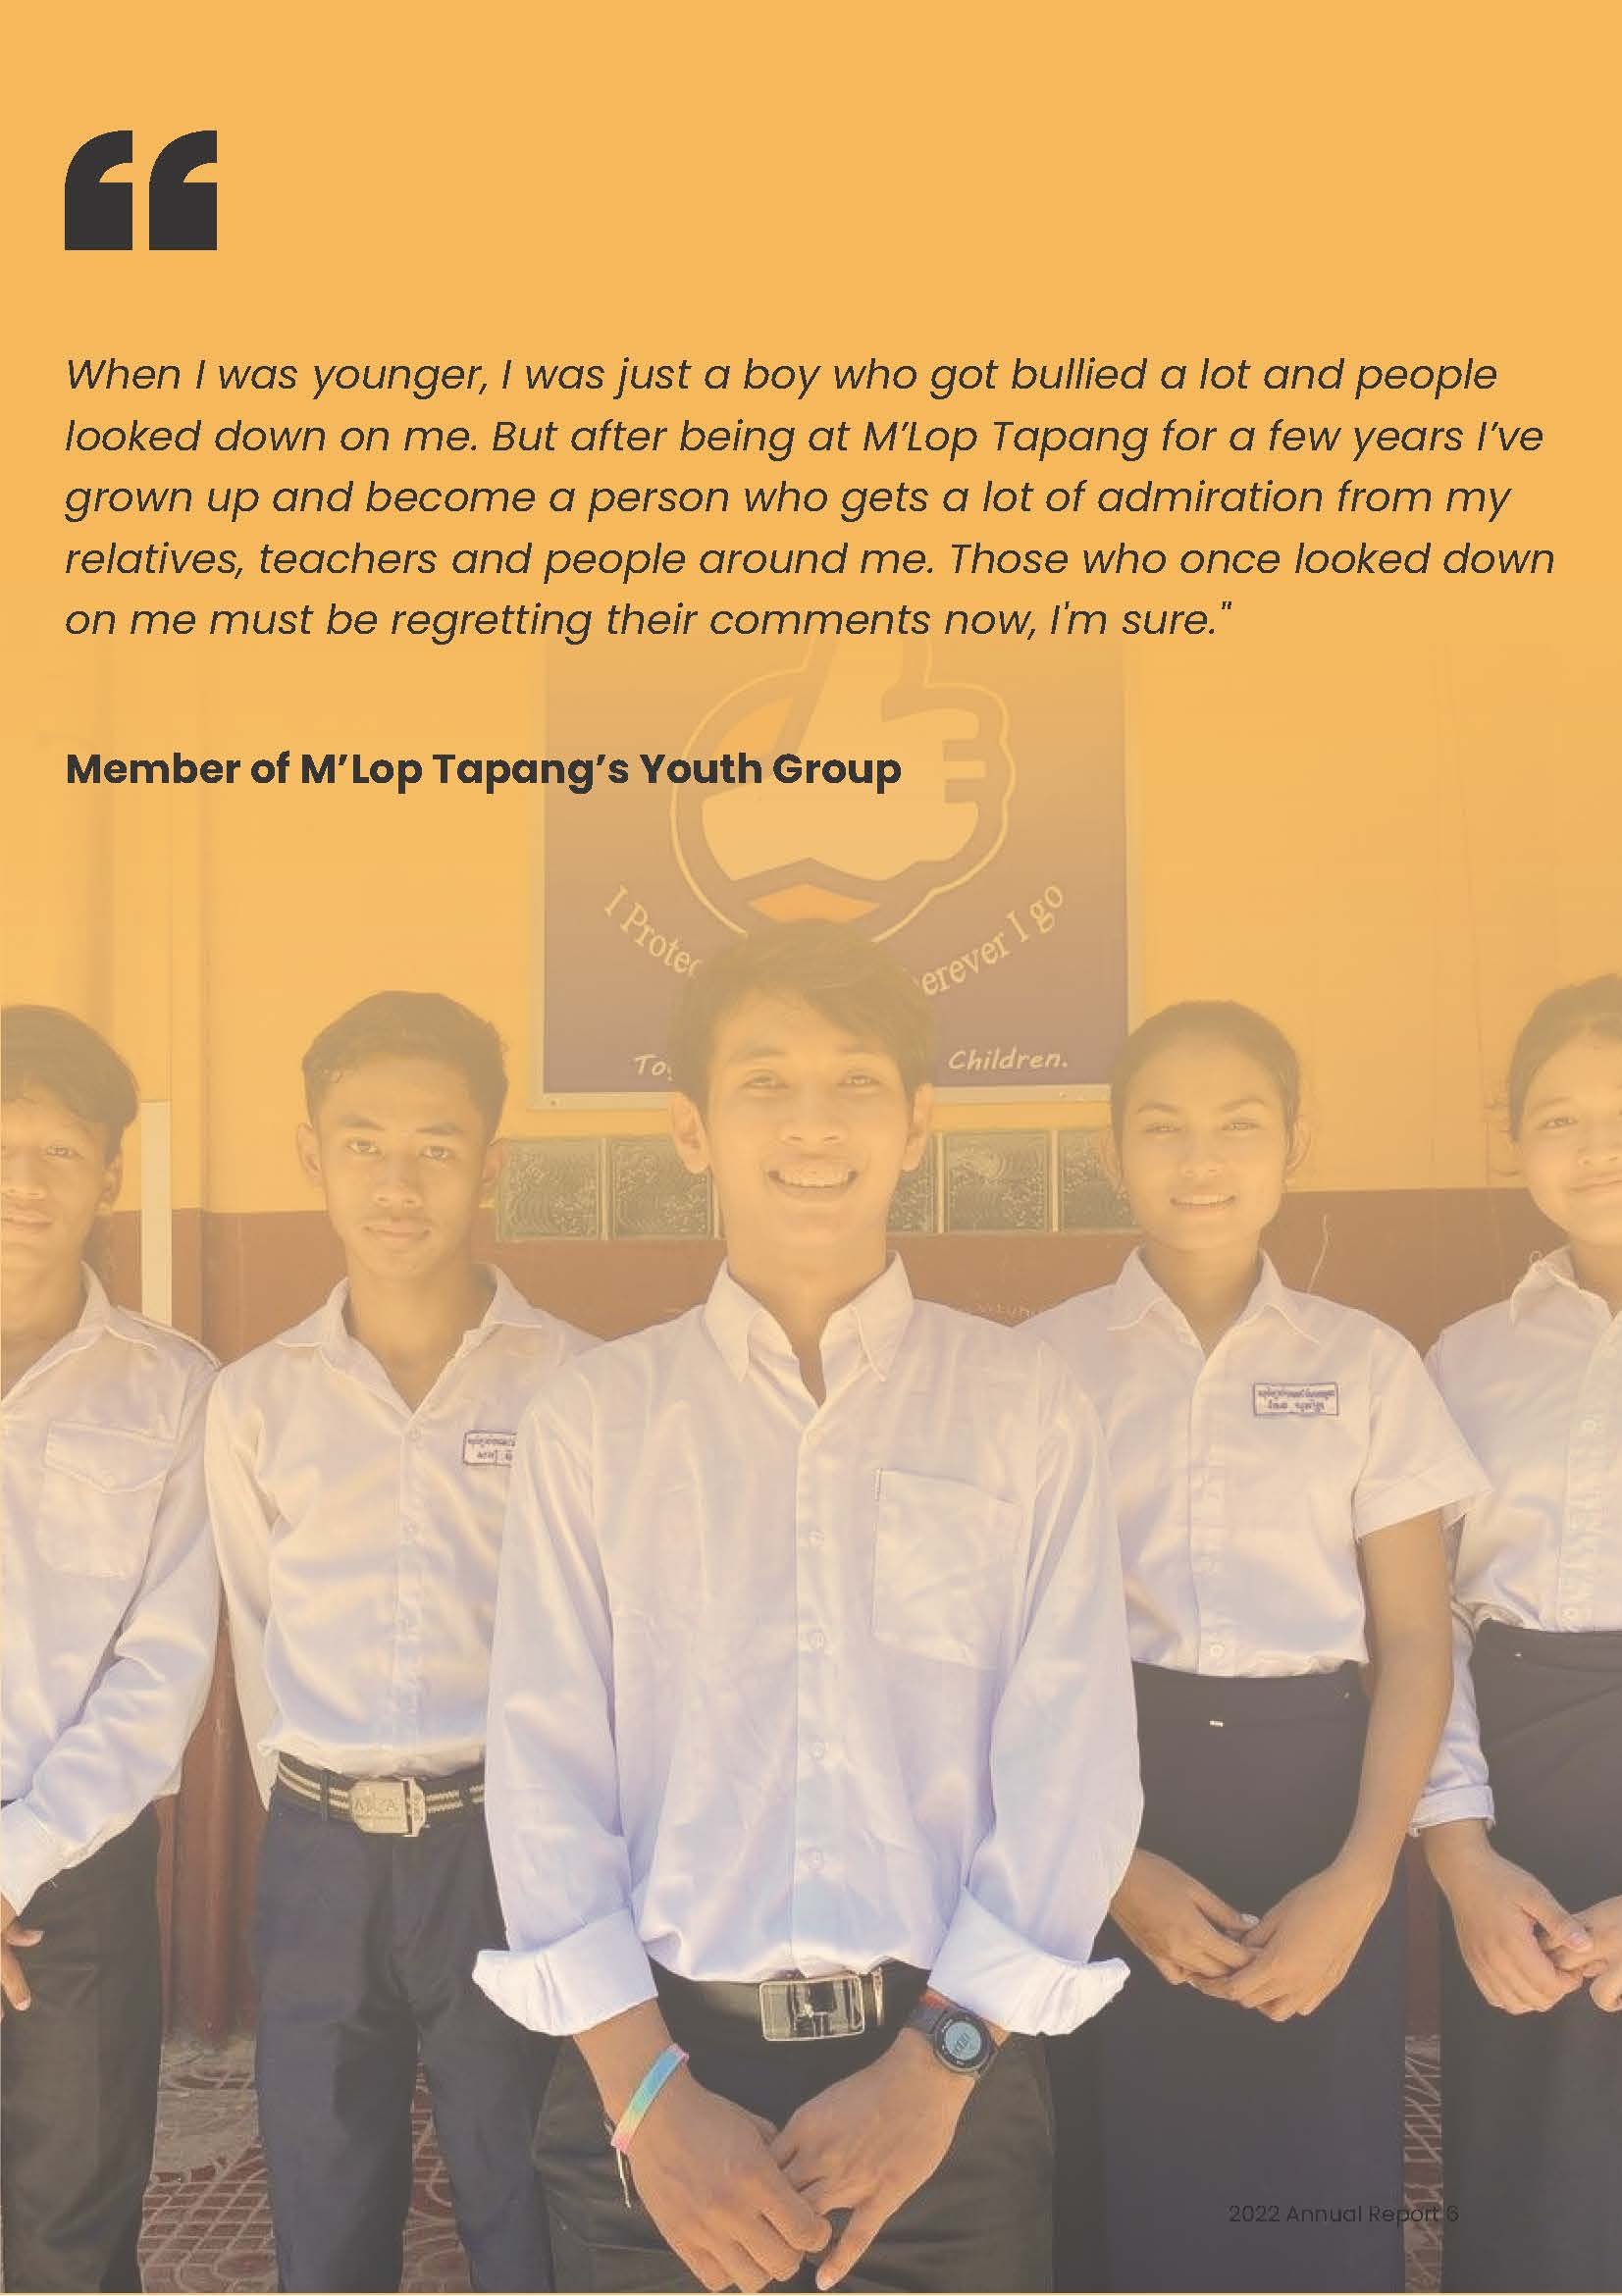 M'Lop Tapang 2022 Annual Report_Page_06.jpg